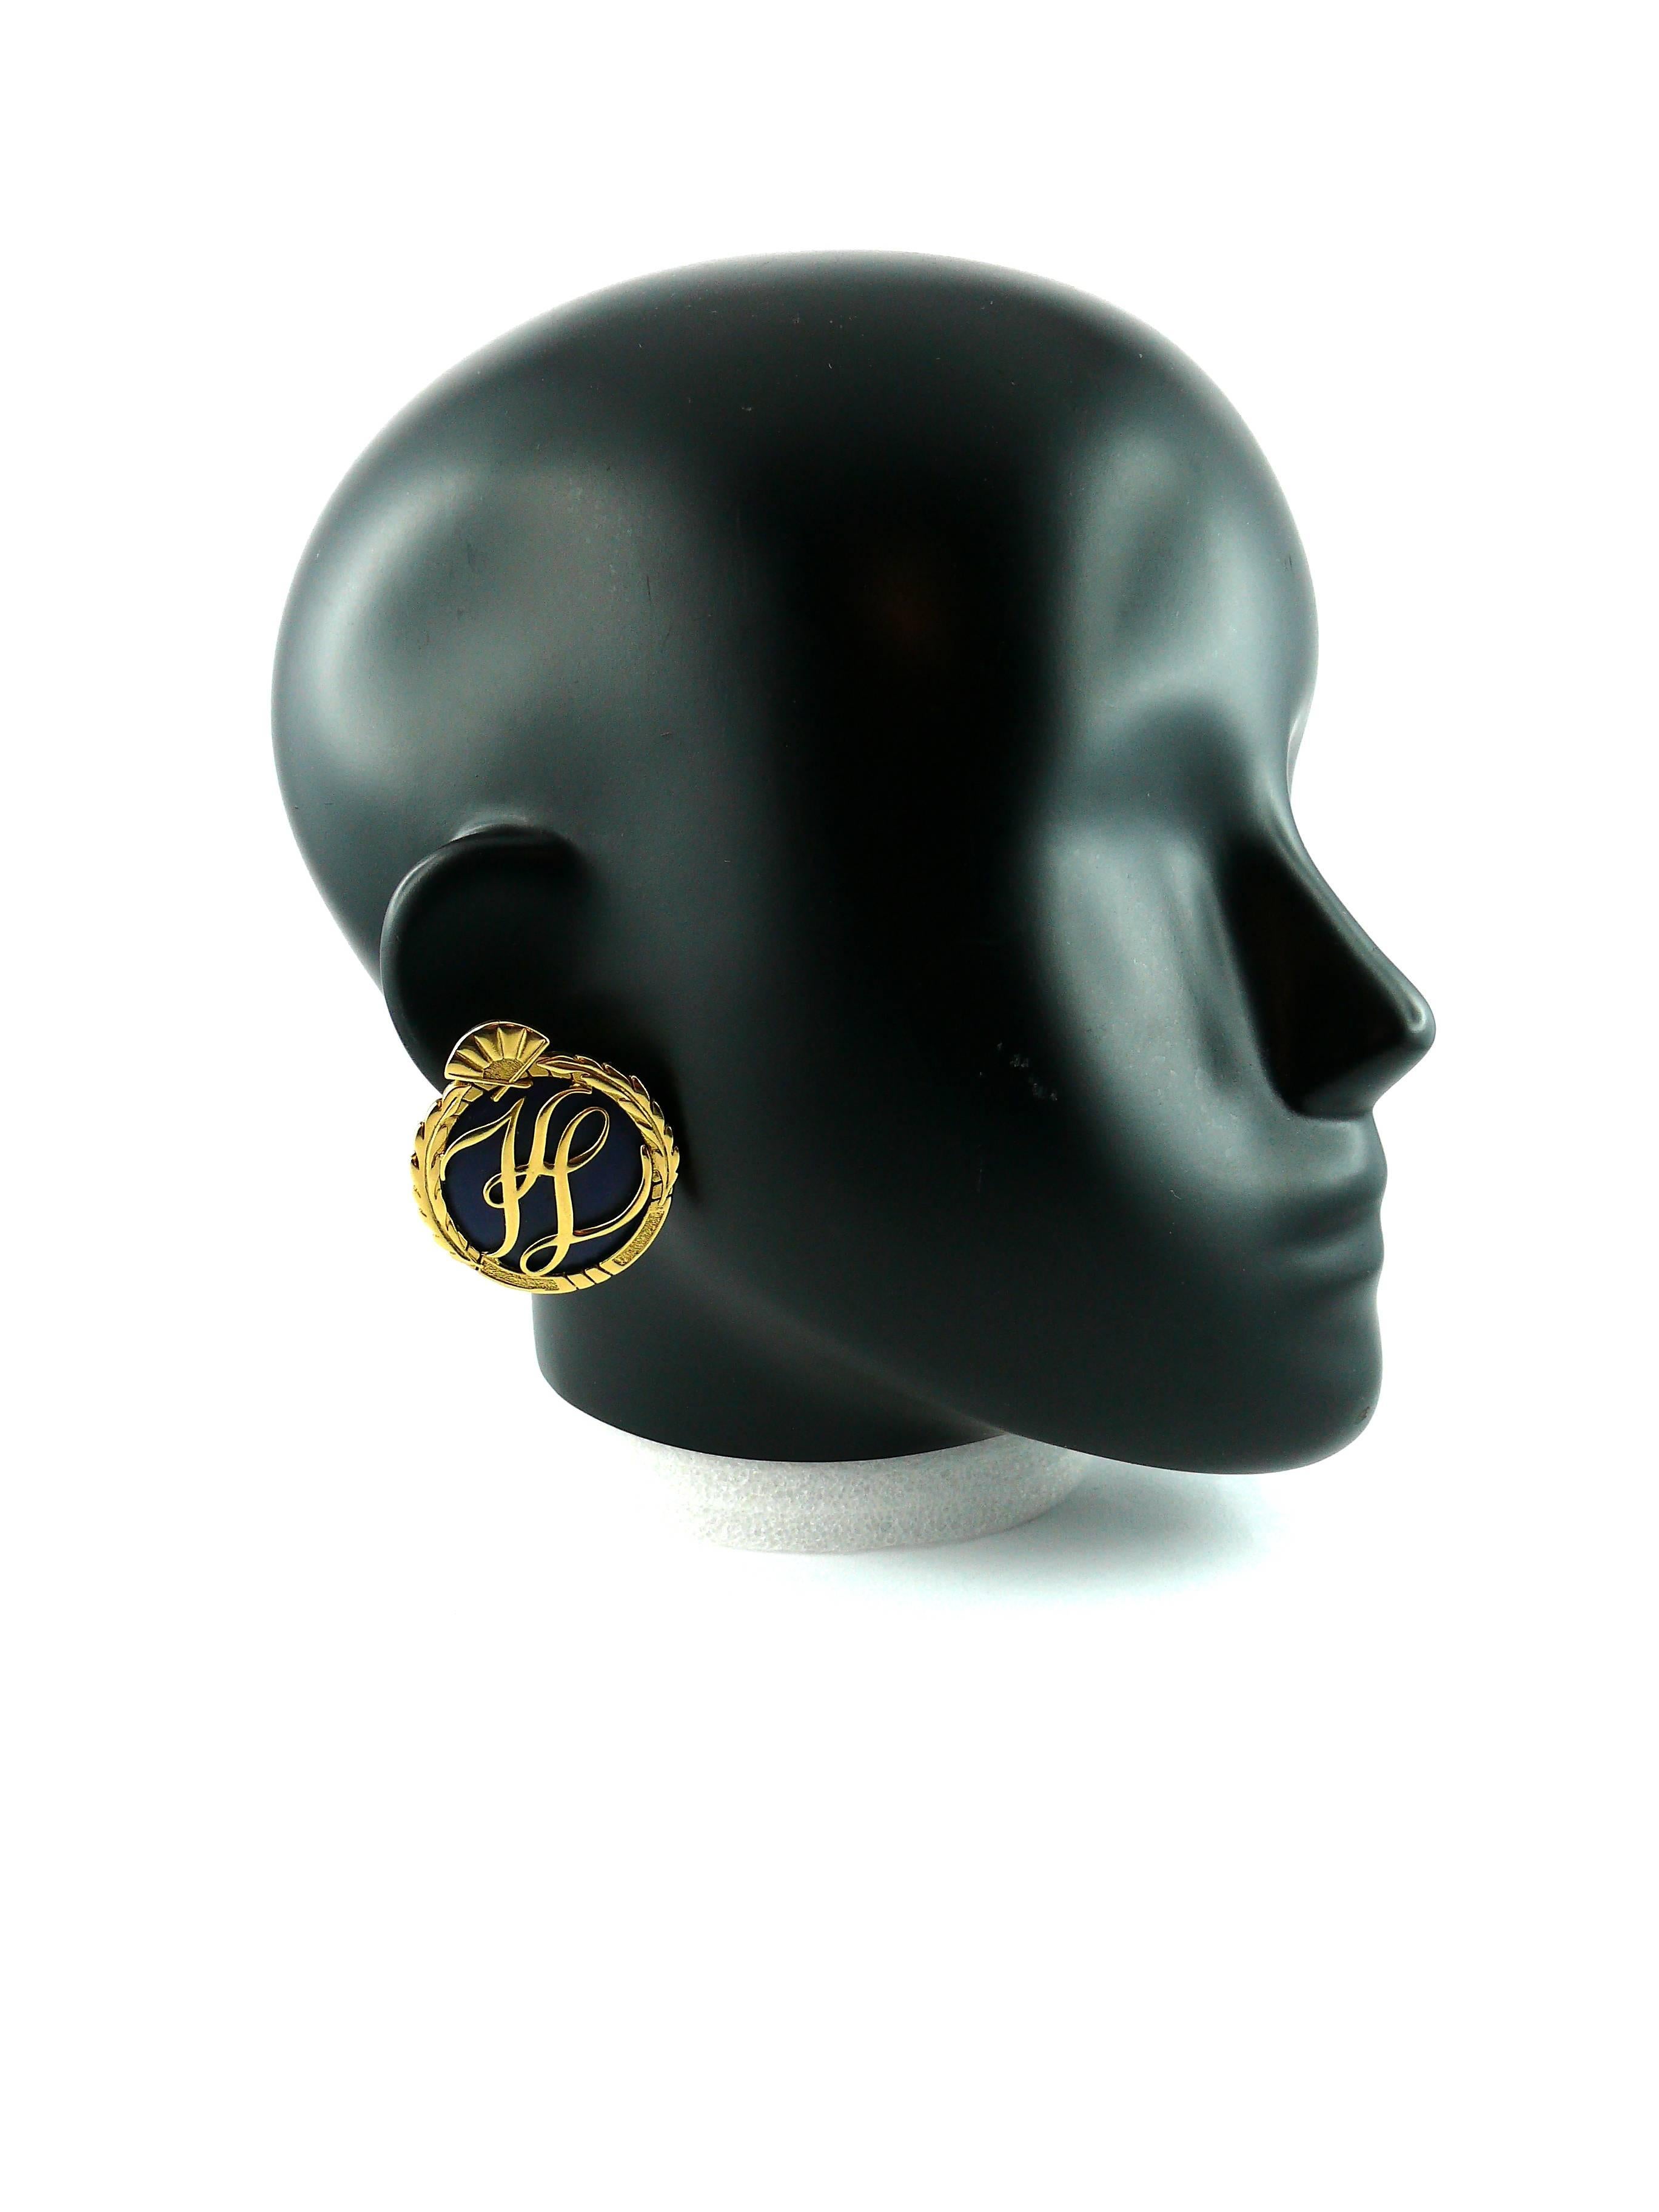 KARL LAGERFELD vintage oversized clip-on earrings in gold tone with deep blue lucite inlaid.

These earring feature designer mongram surrounded by laureus garlands and topped with iconic fan.

Embossed KL.

JEWELRY CONDITION CHART
- New or never